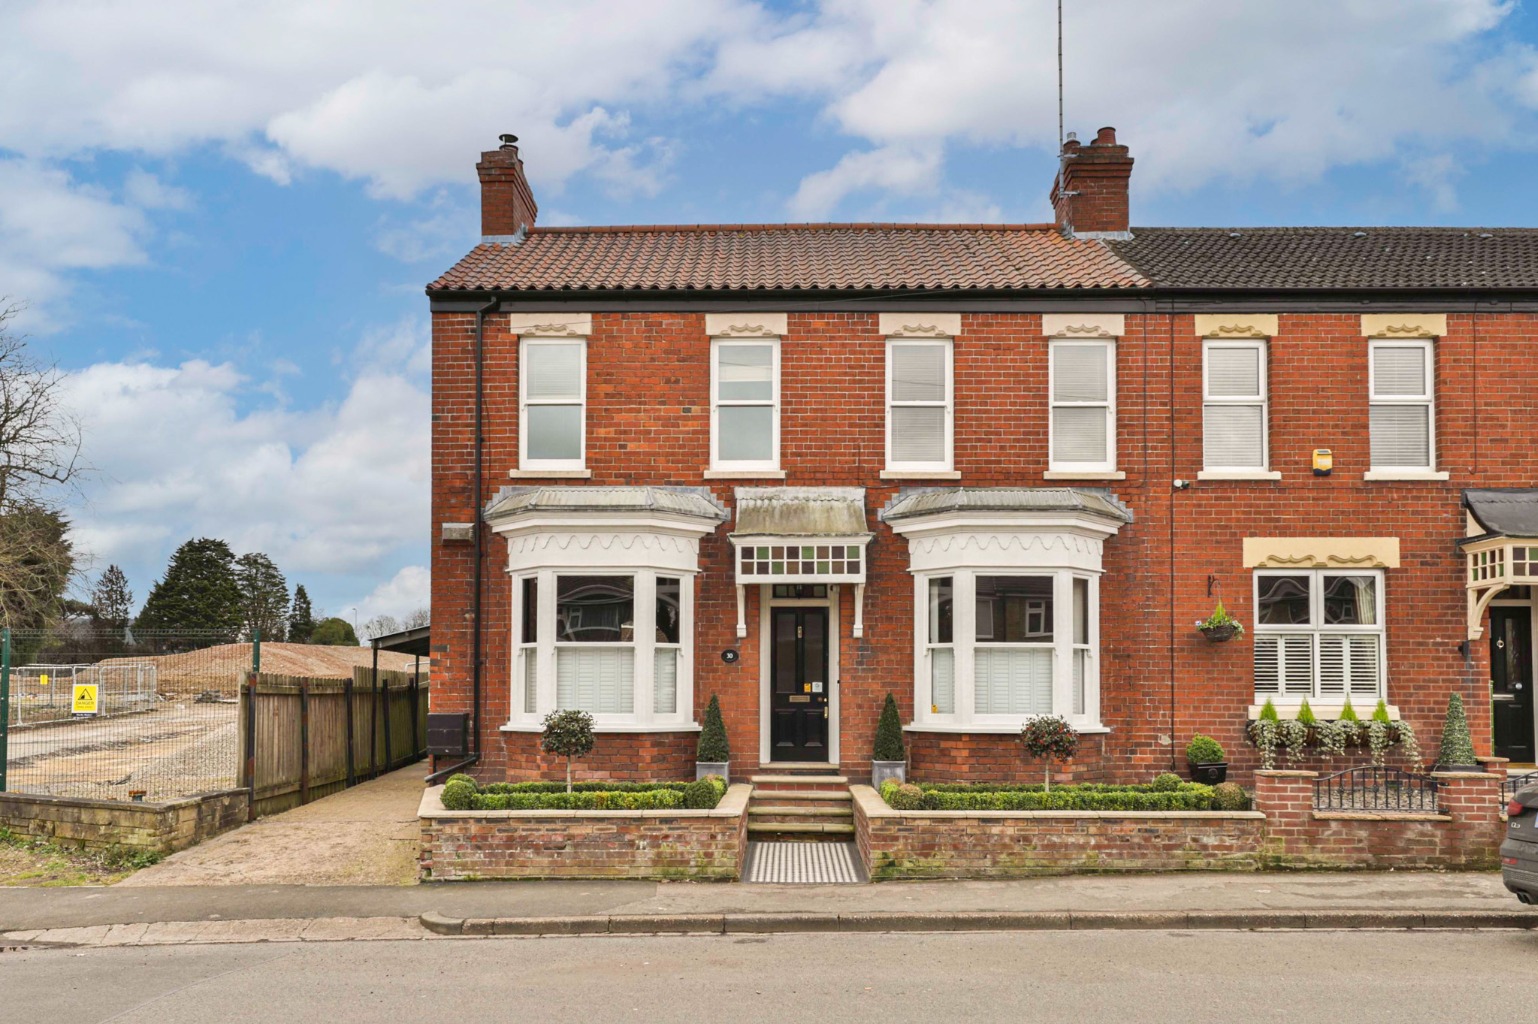 4 bed semi-detached house for sale in Well Lane, Hull - Property Image 1